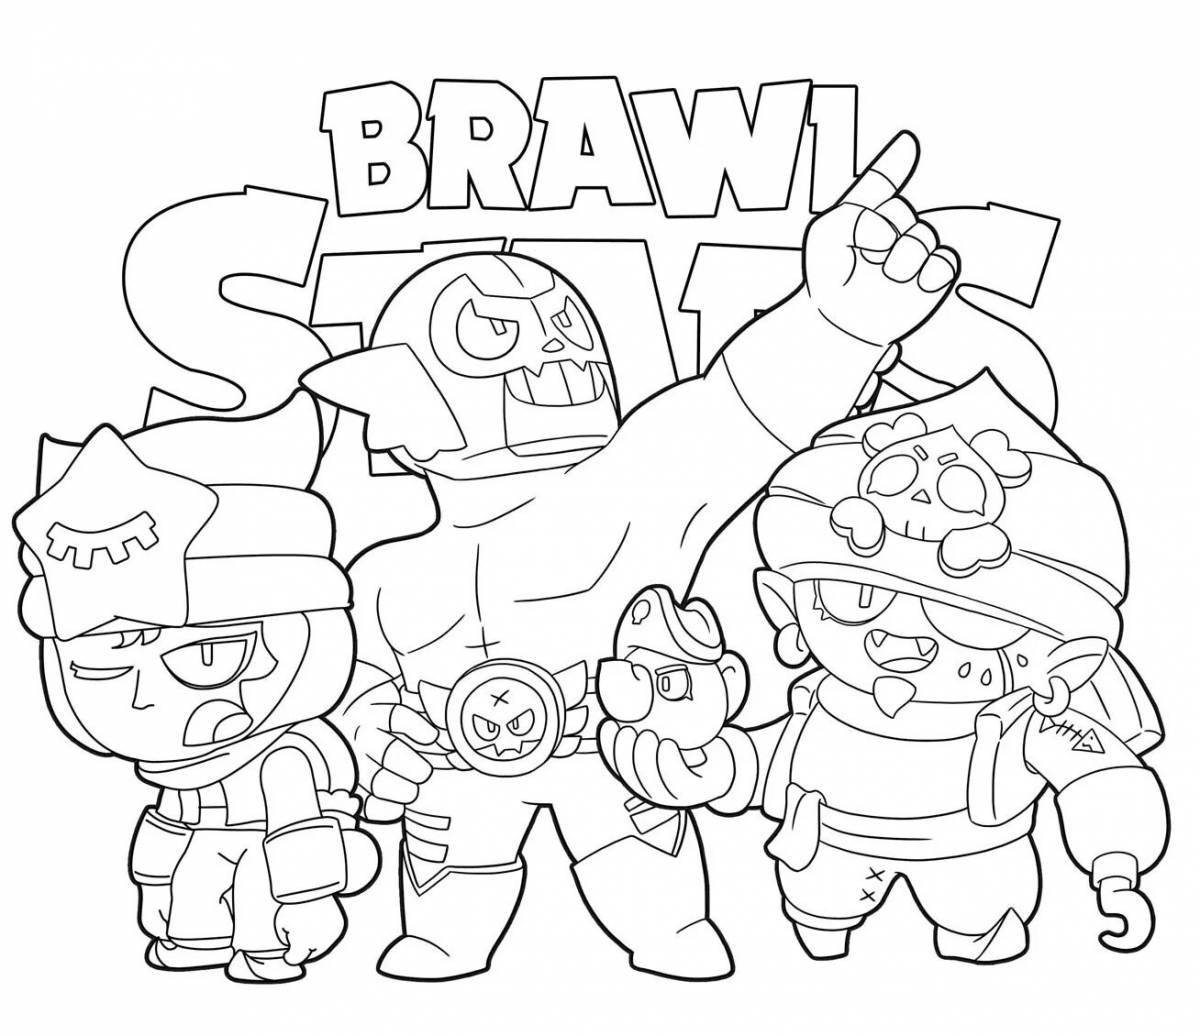 Unique coloring pages brawl stars brawler icons